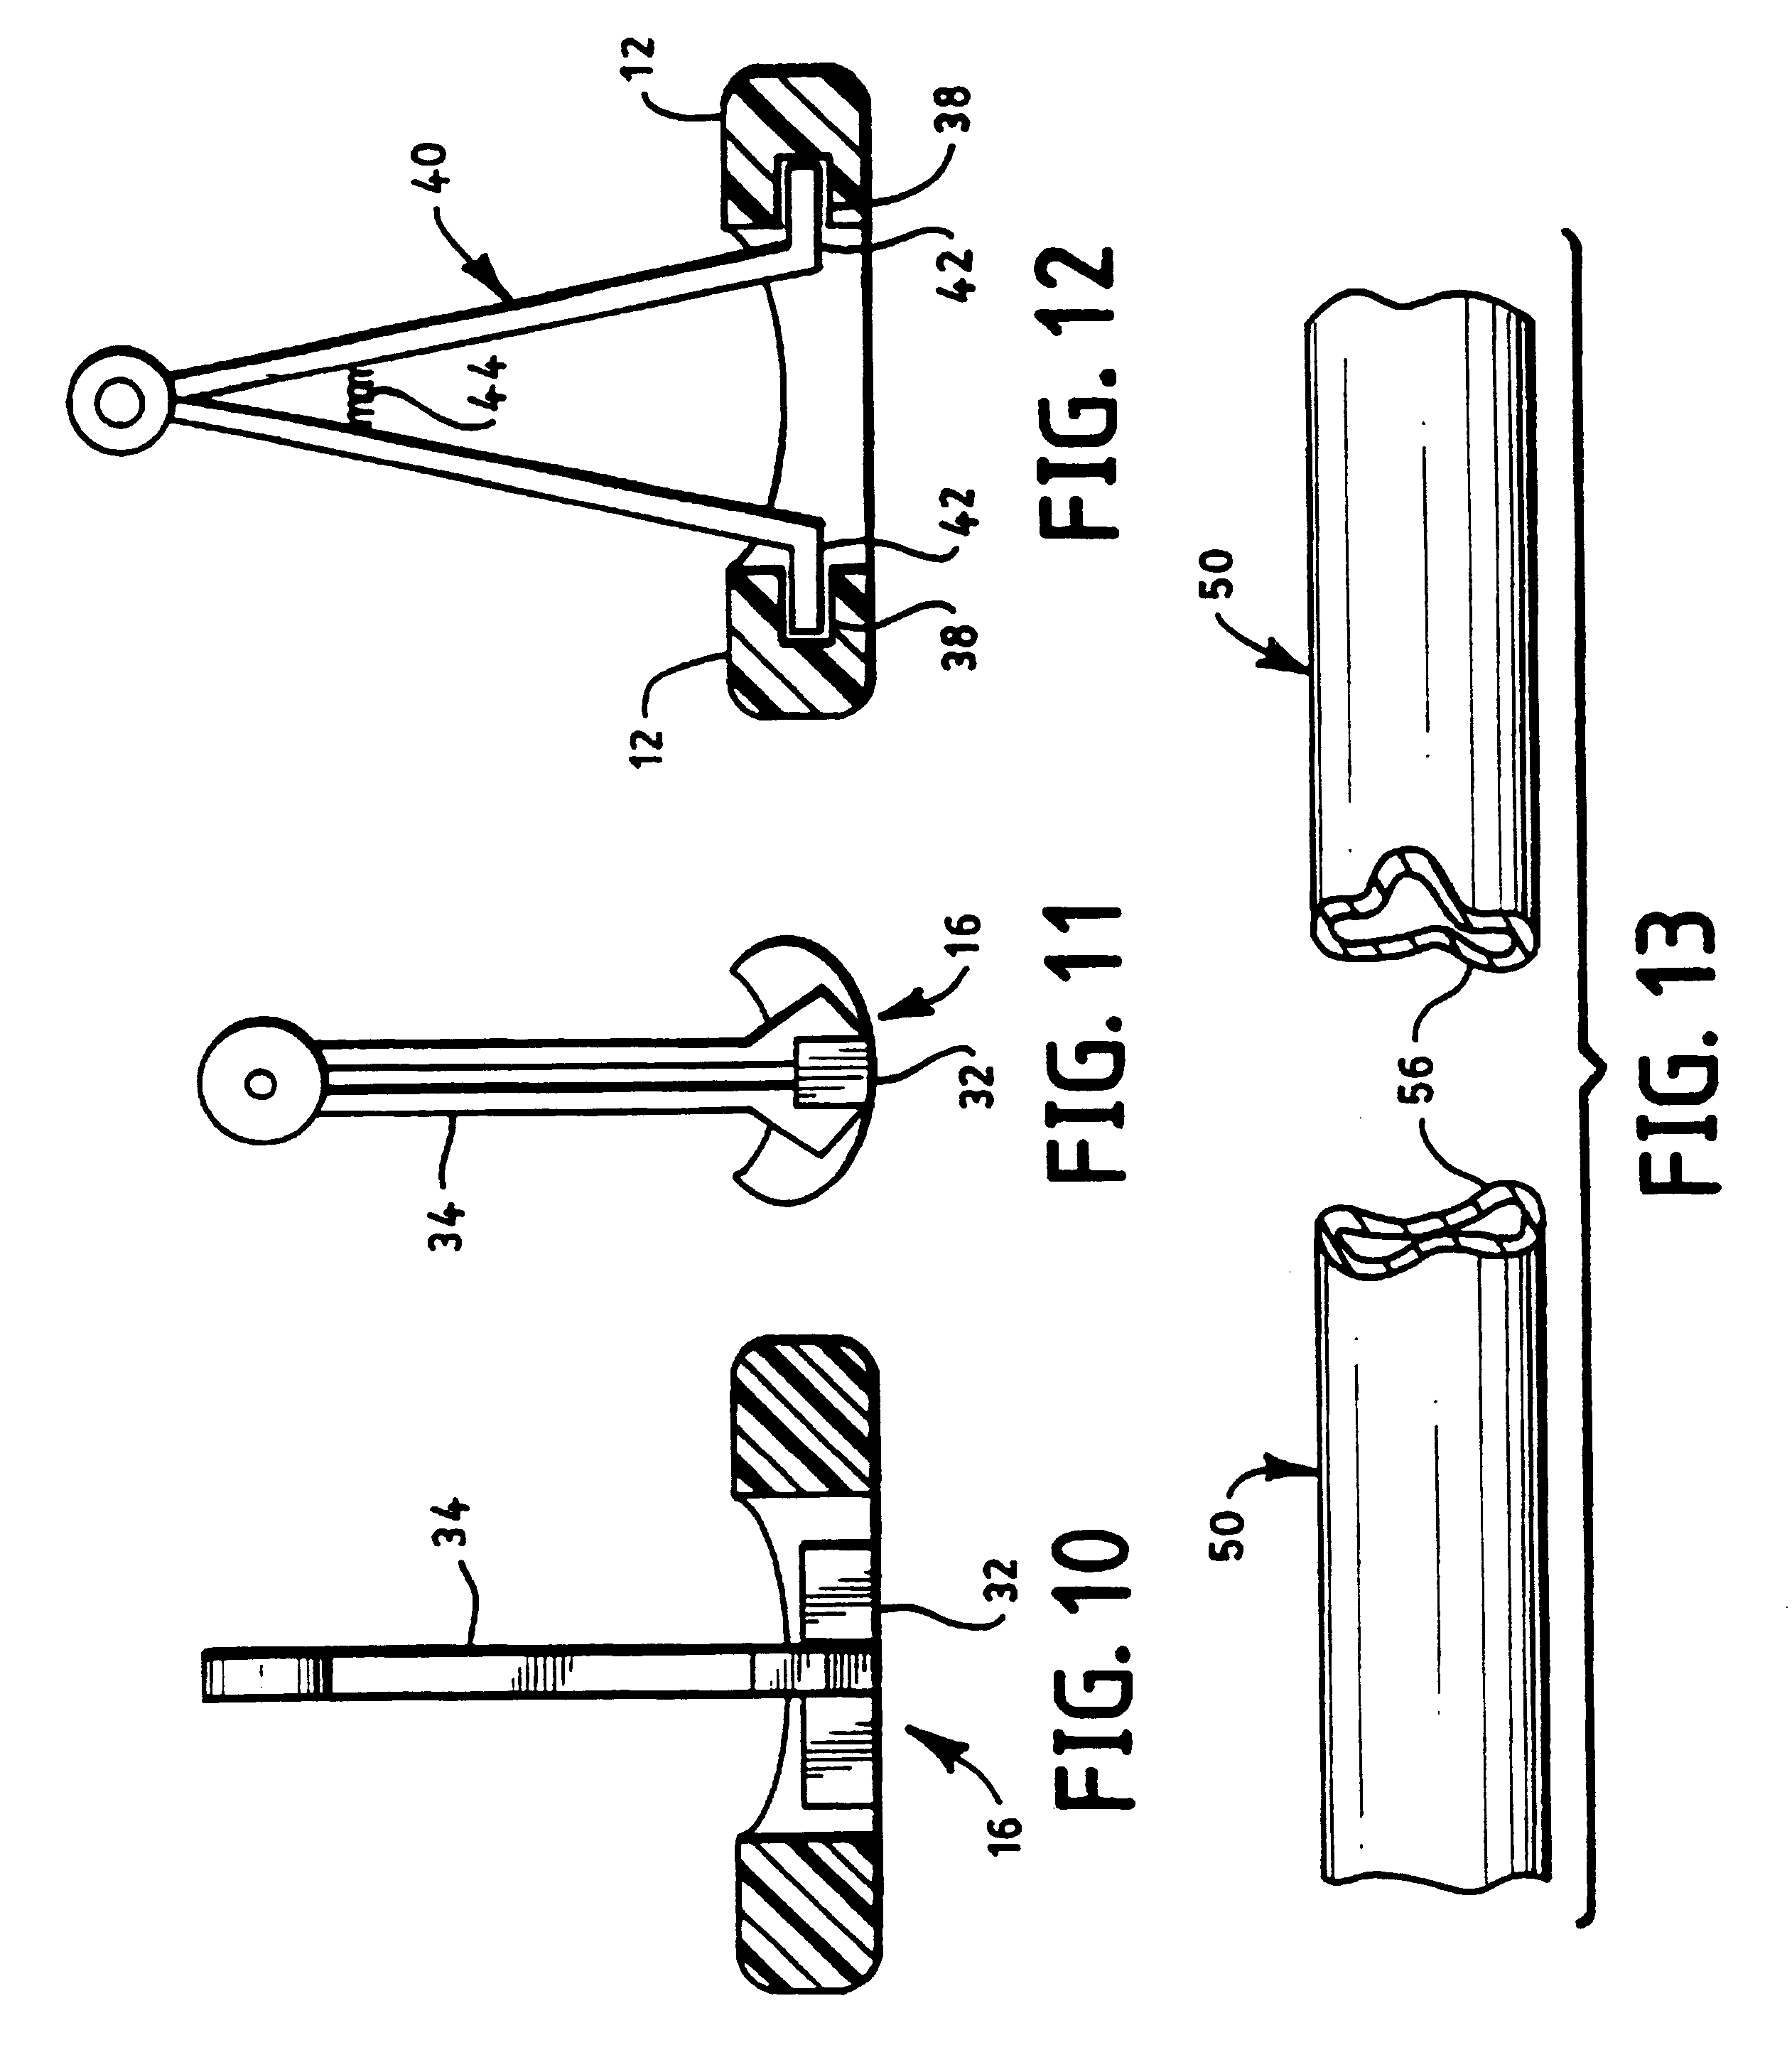 Device and method for the surgical anastomasis of tubular structures